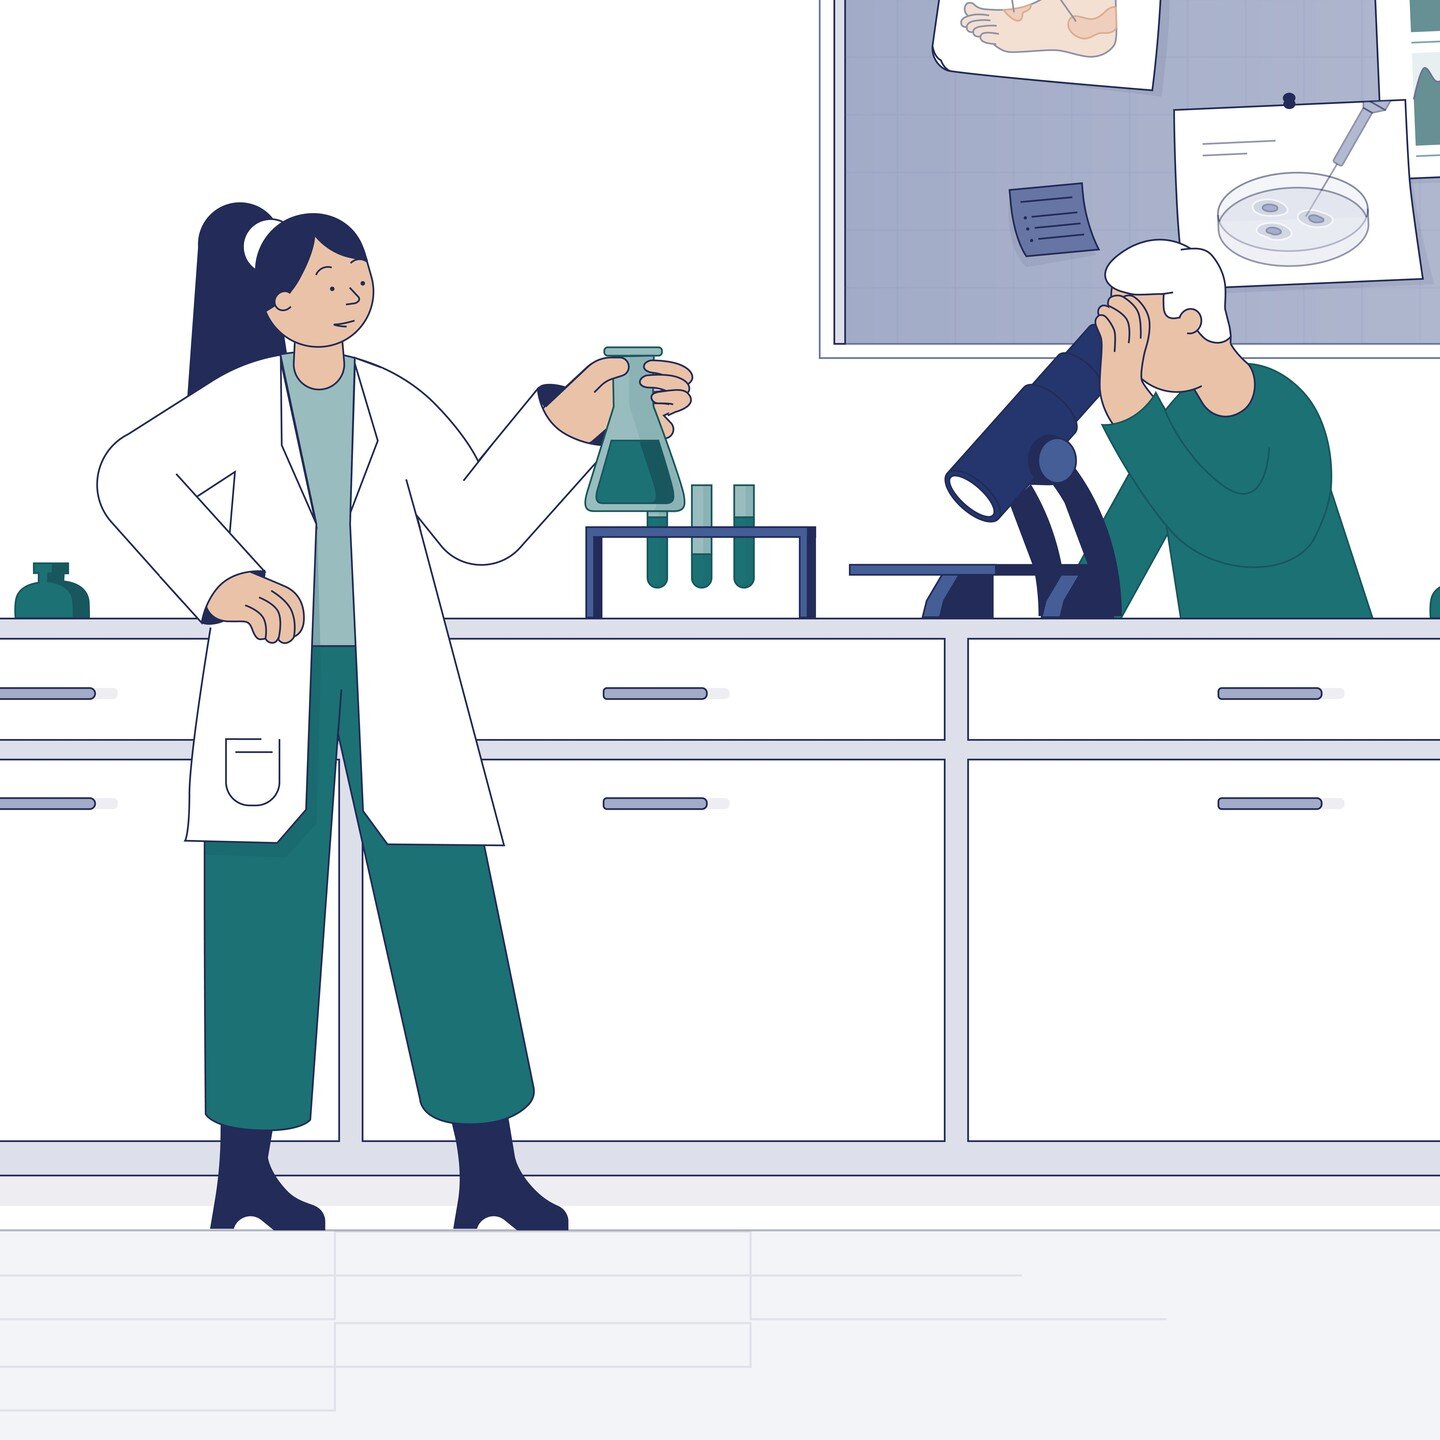 Have you ever heard about stem cells? And did you know they are successfully being used in the treatment of leukemia and can help scientists find a solution to many health challenges?

Learn more about what they are and how Novo Nordisk Foundation&rs